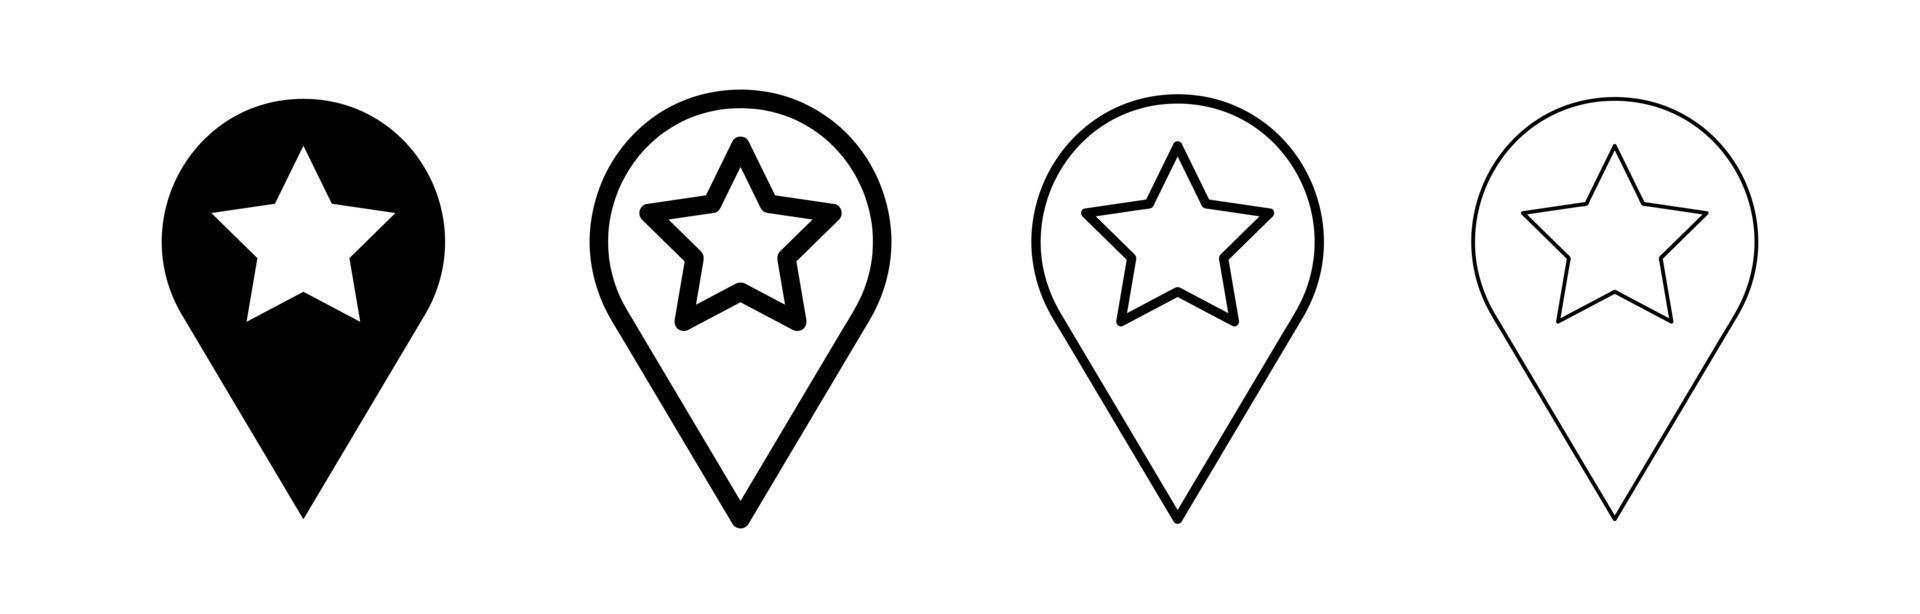 Star location sign icon. Map location sign. vector